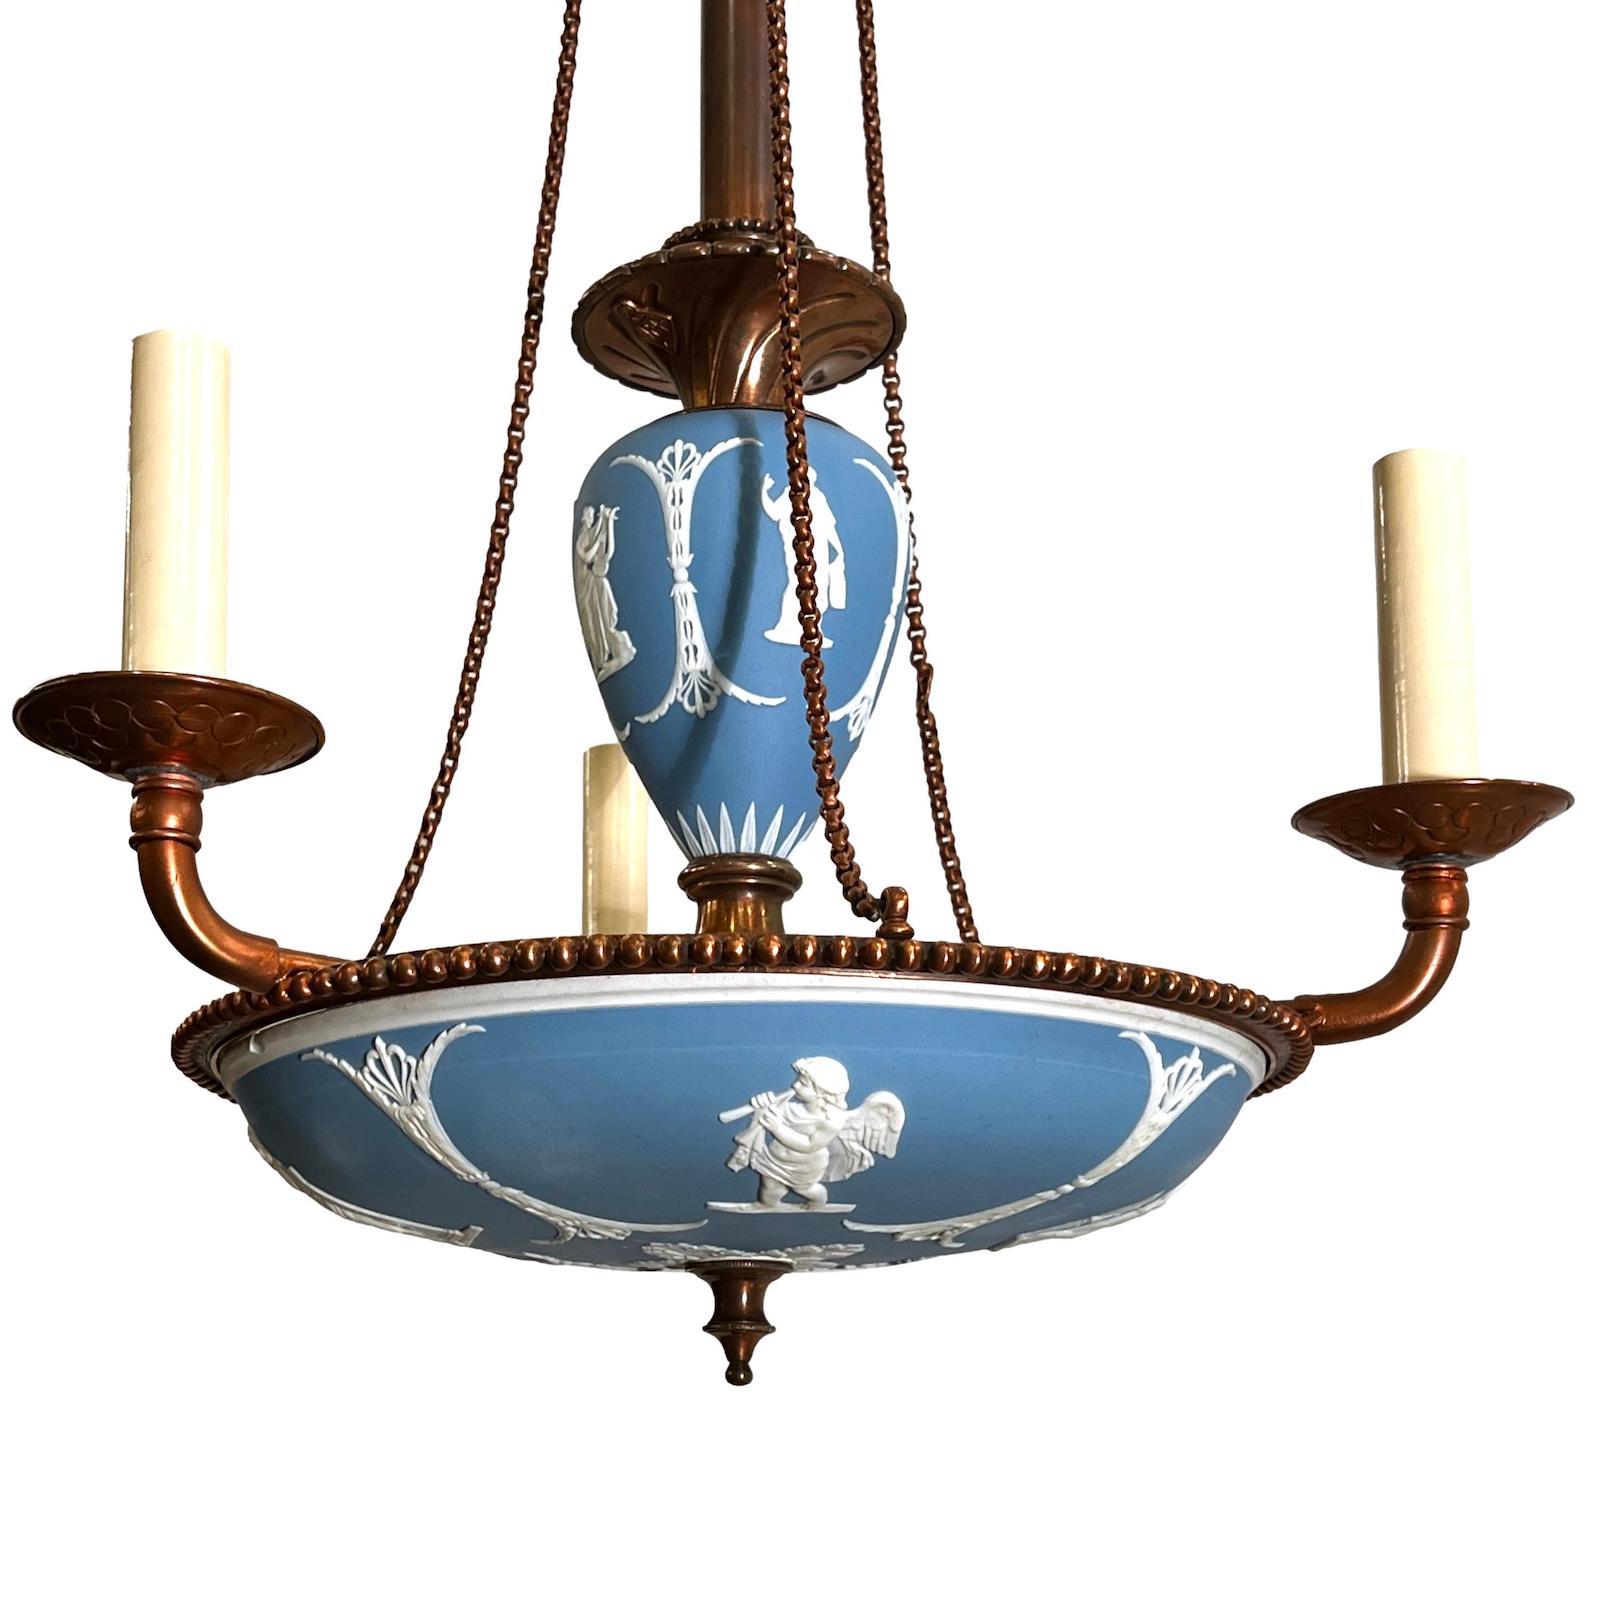 Antique English Wedgwood Chandelier  In Good Condition For Sale In New York, NY